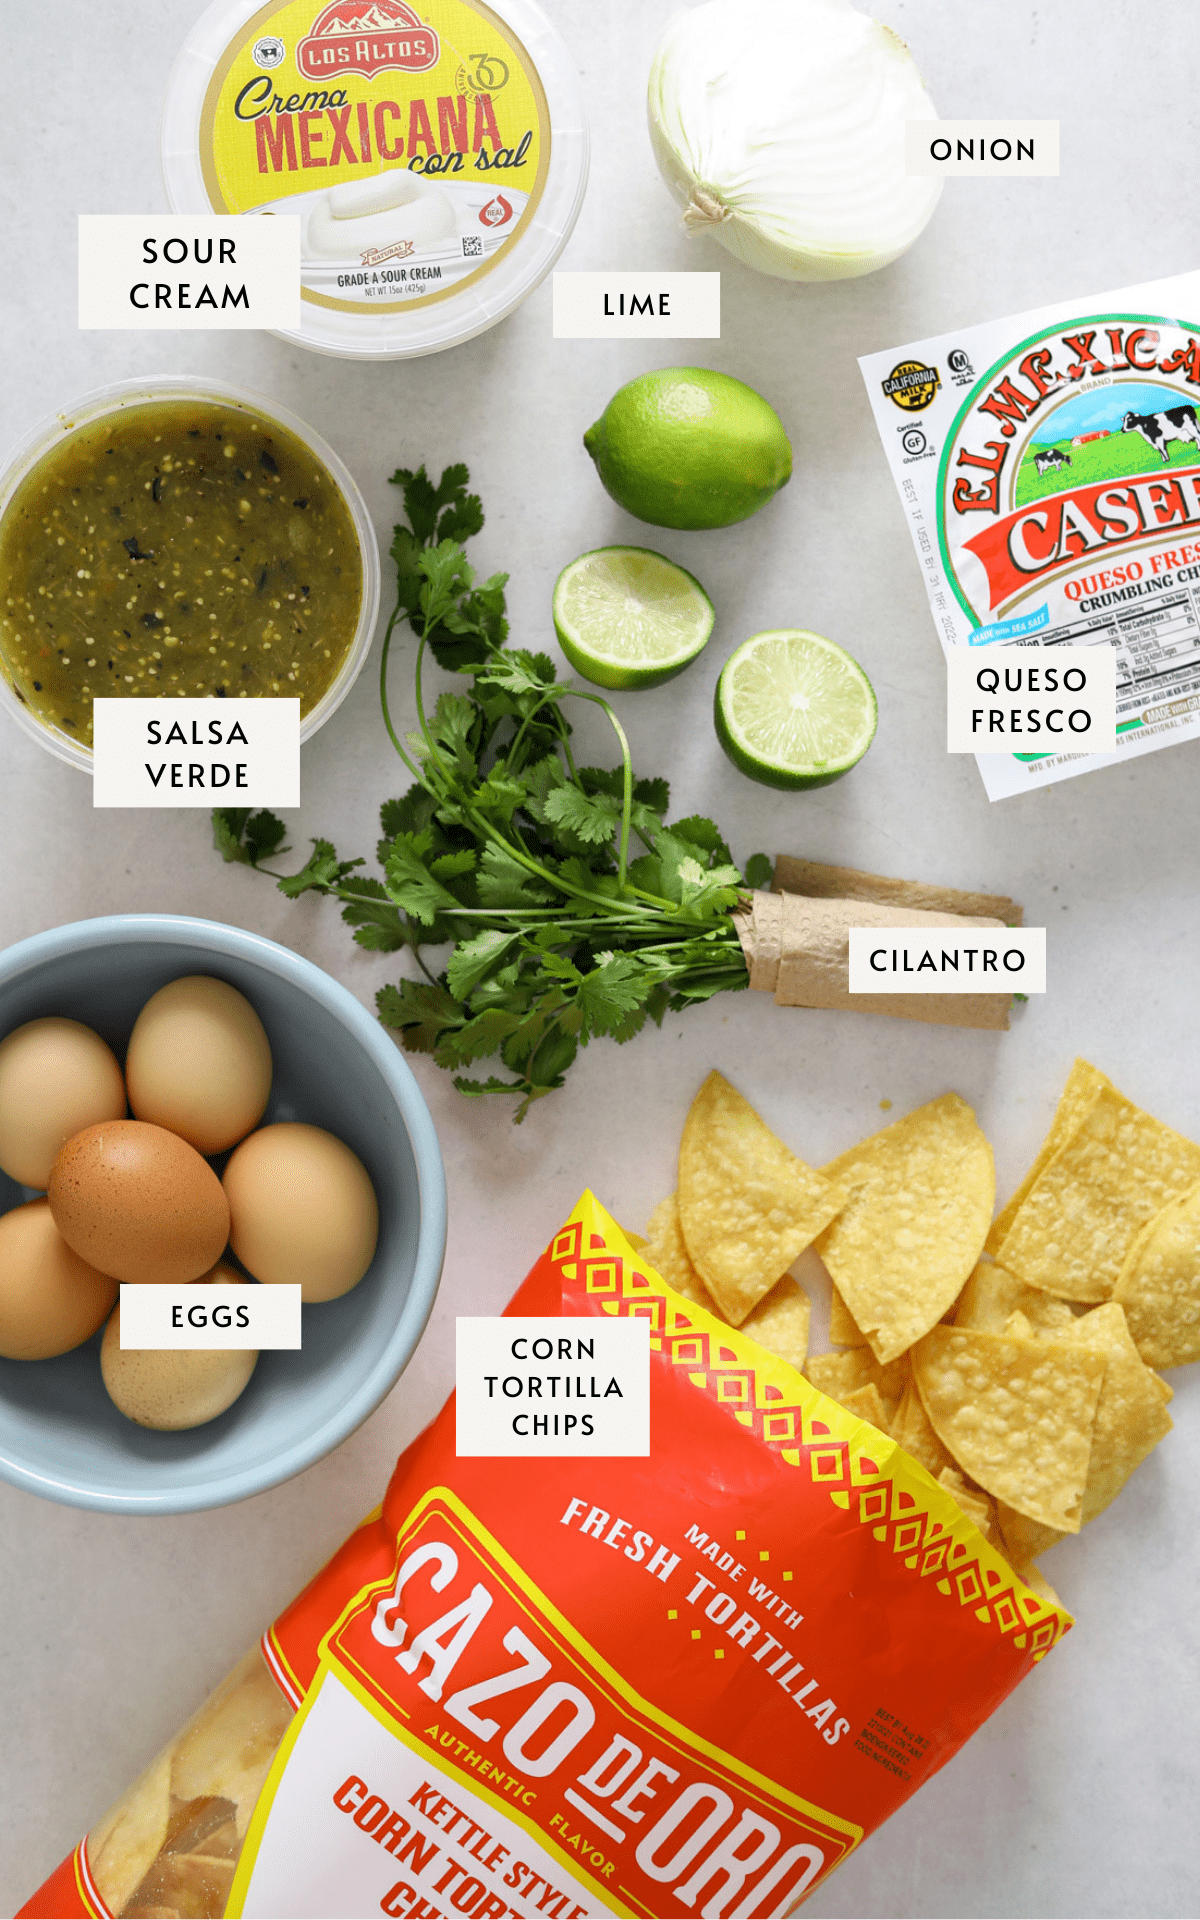 a container of tomatillo salsa, sour cream, queso fresco, a red bag of corn tortilla chips, a bundle of cilantro, a blue bowl filled with brown eggs, two limes and a white onion.